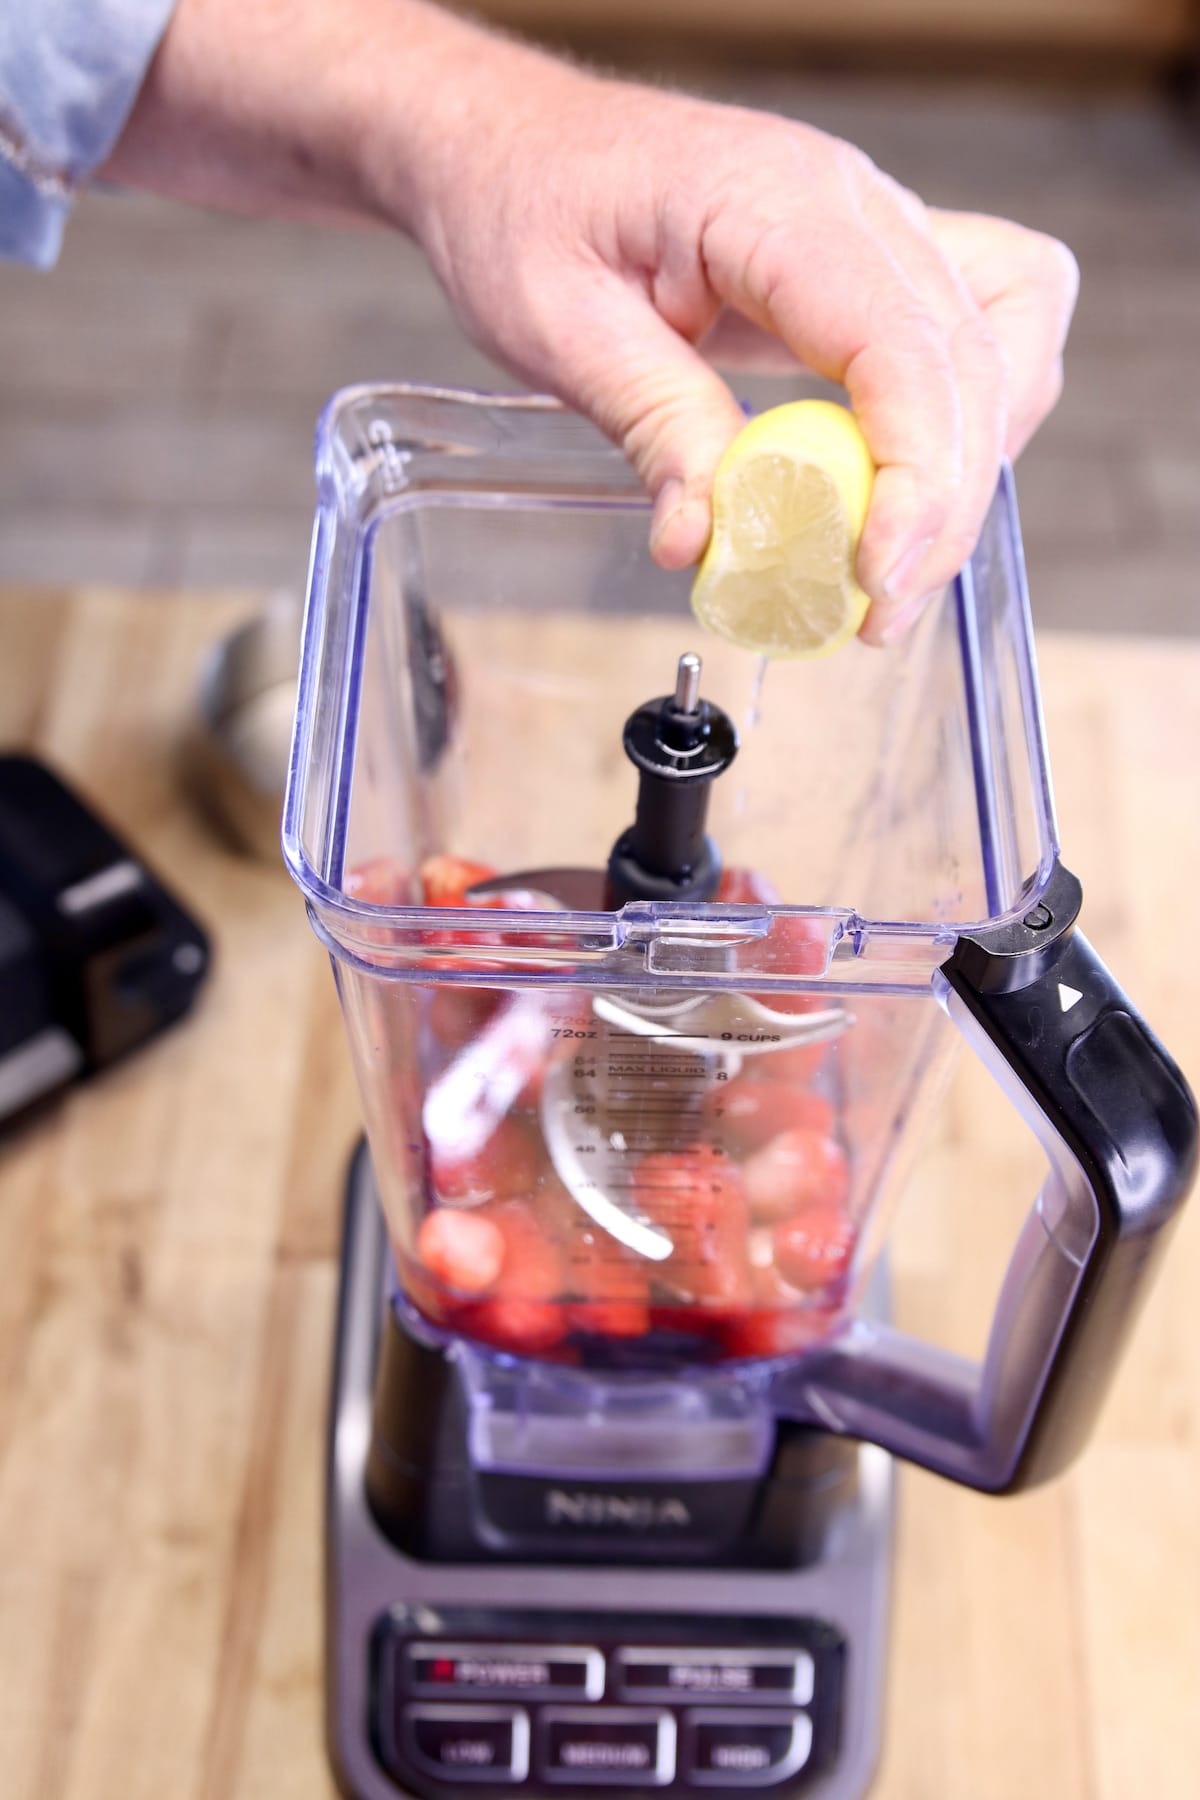 squeezing half a lemon into blender with strawberries.